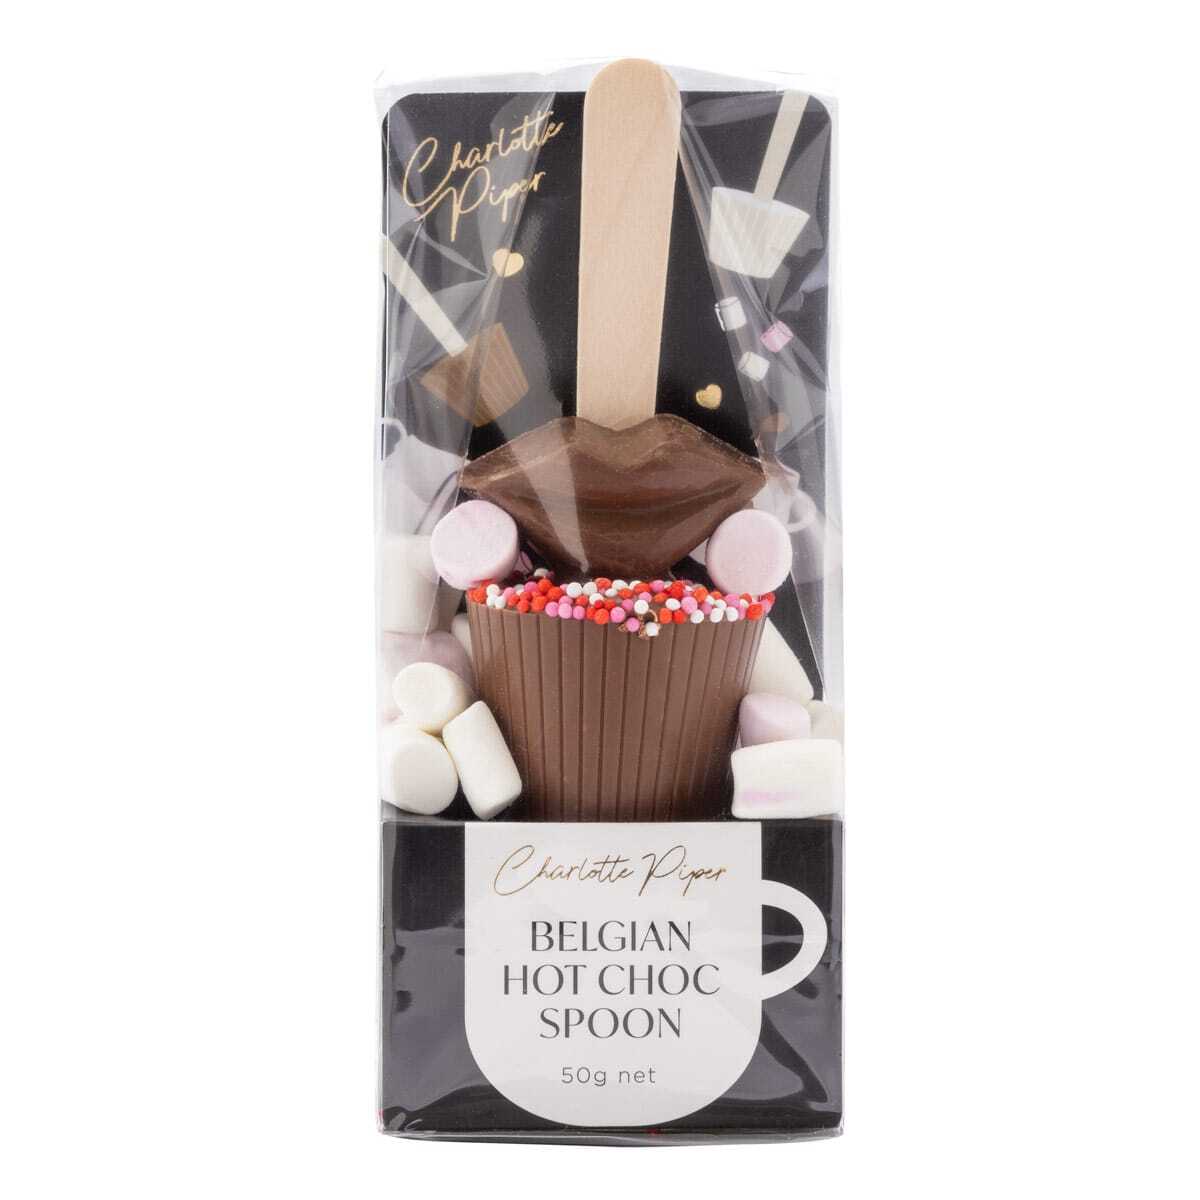 Charlotte Piper Hot Chocolate Sprinkle A Kiss Spoon - 50gm